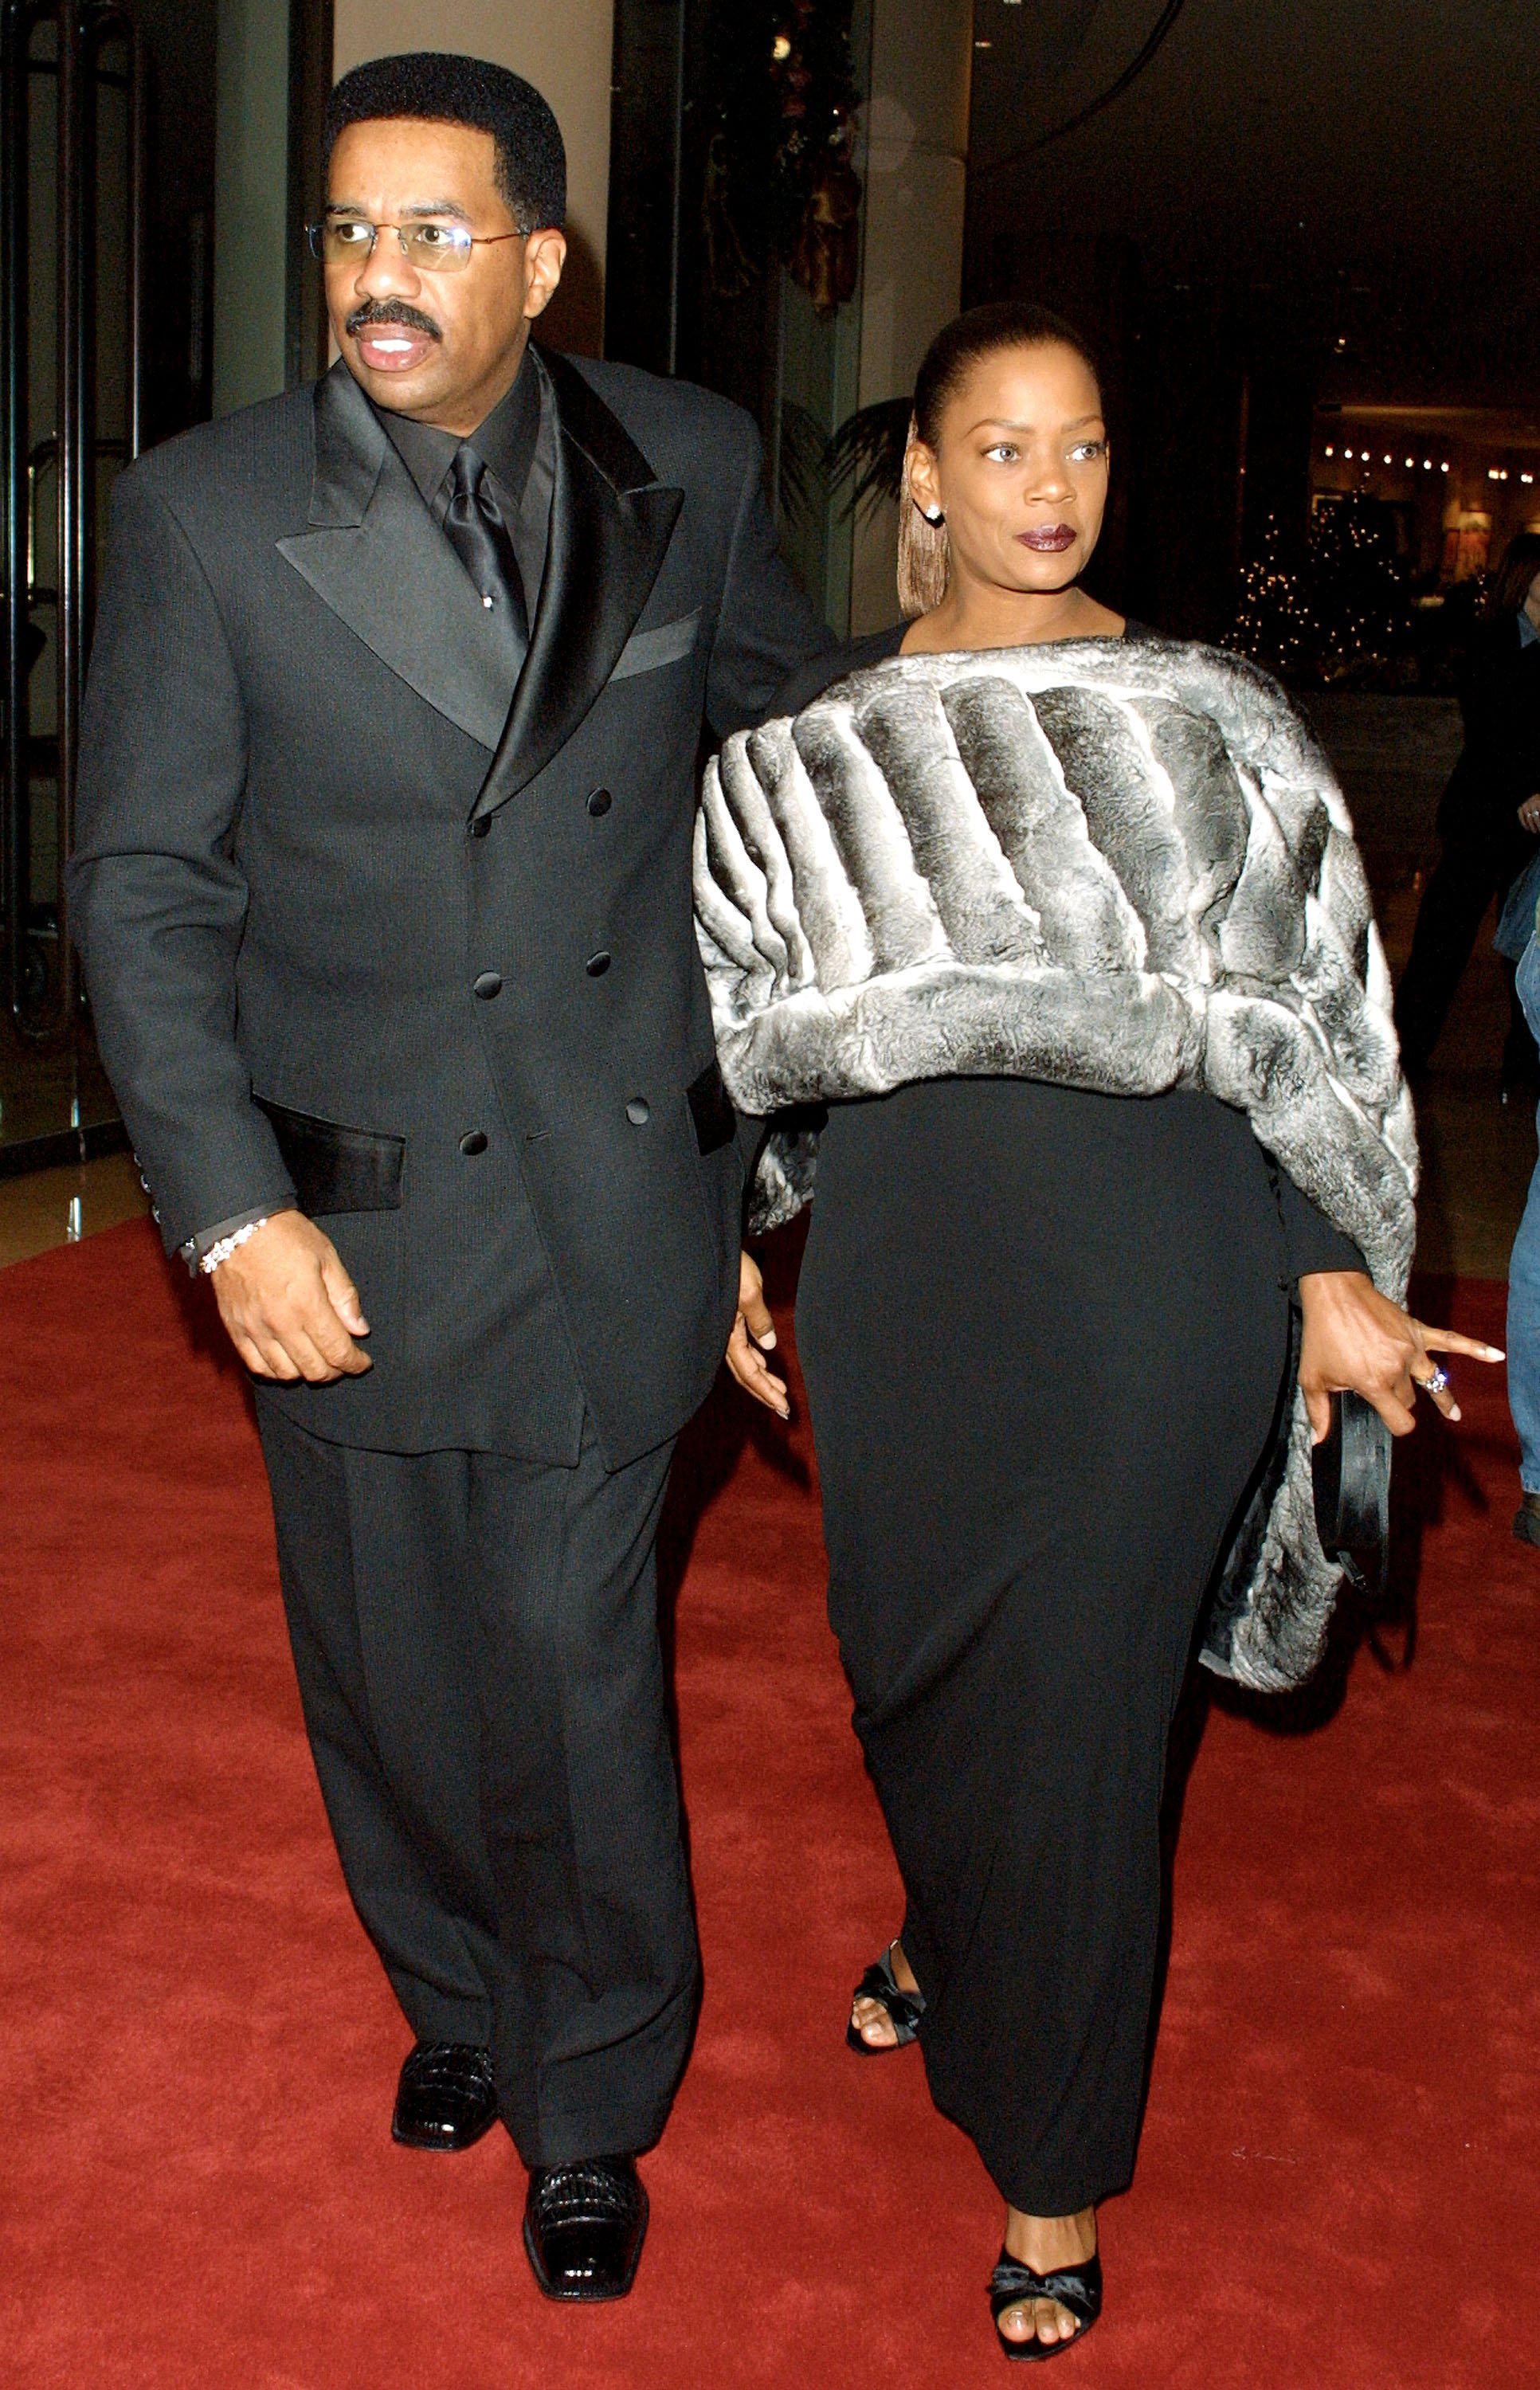  Steve Harvey and his wife Mary attend the Fourth Annual Rainbow/PUSH Coalition Awards Dinner December 11, 2001 in Beverly Hills, CA | Source: Getty Images 